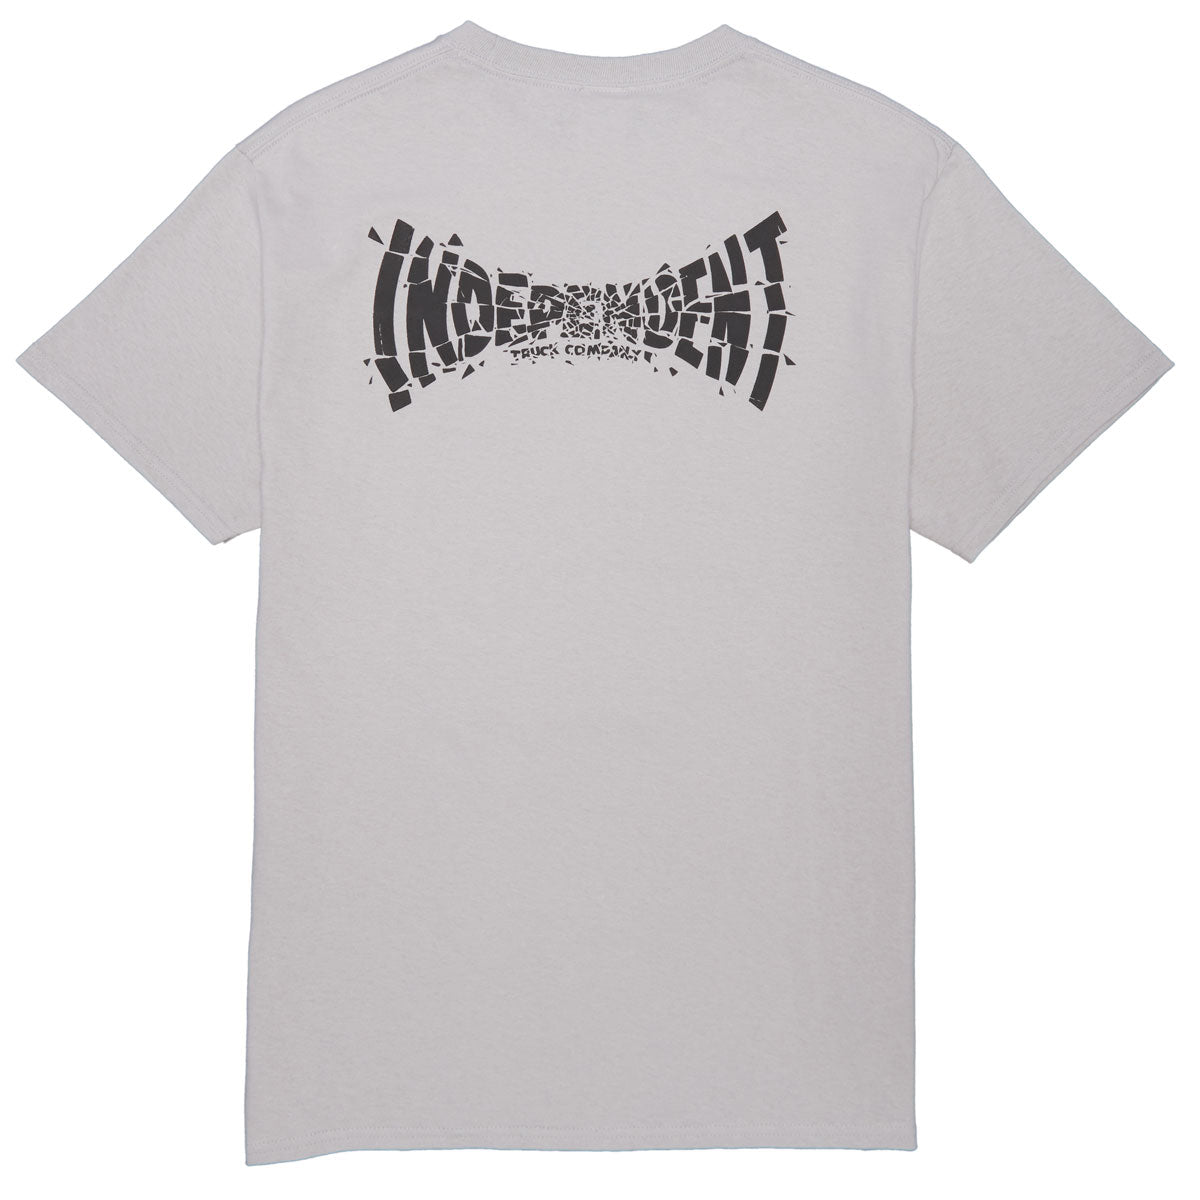 Independent Shatter Span T-Shirt - Silver image 1